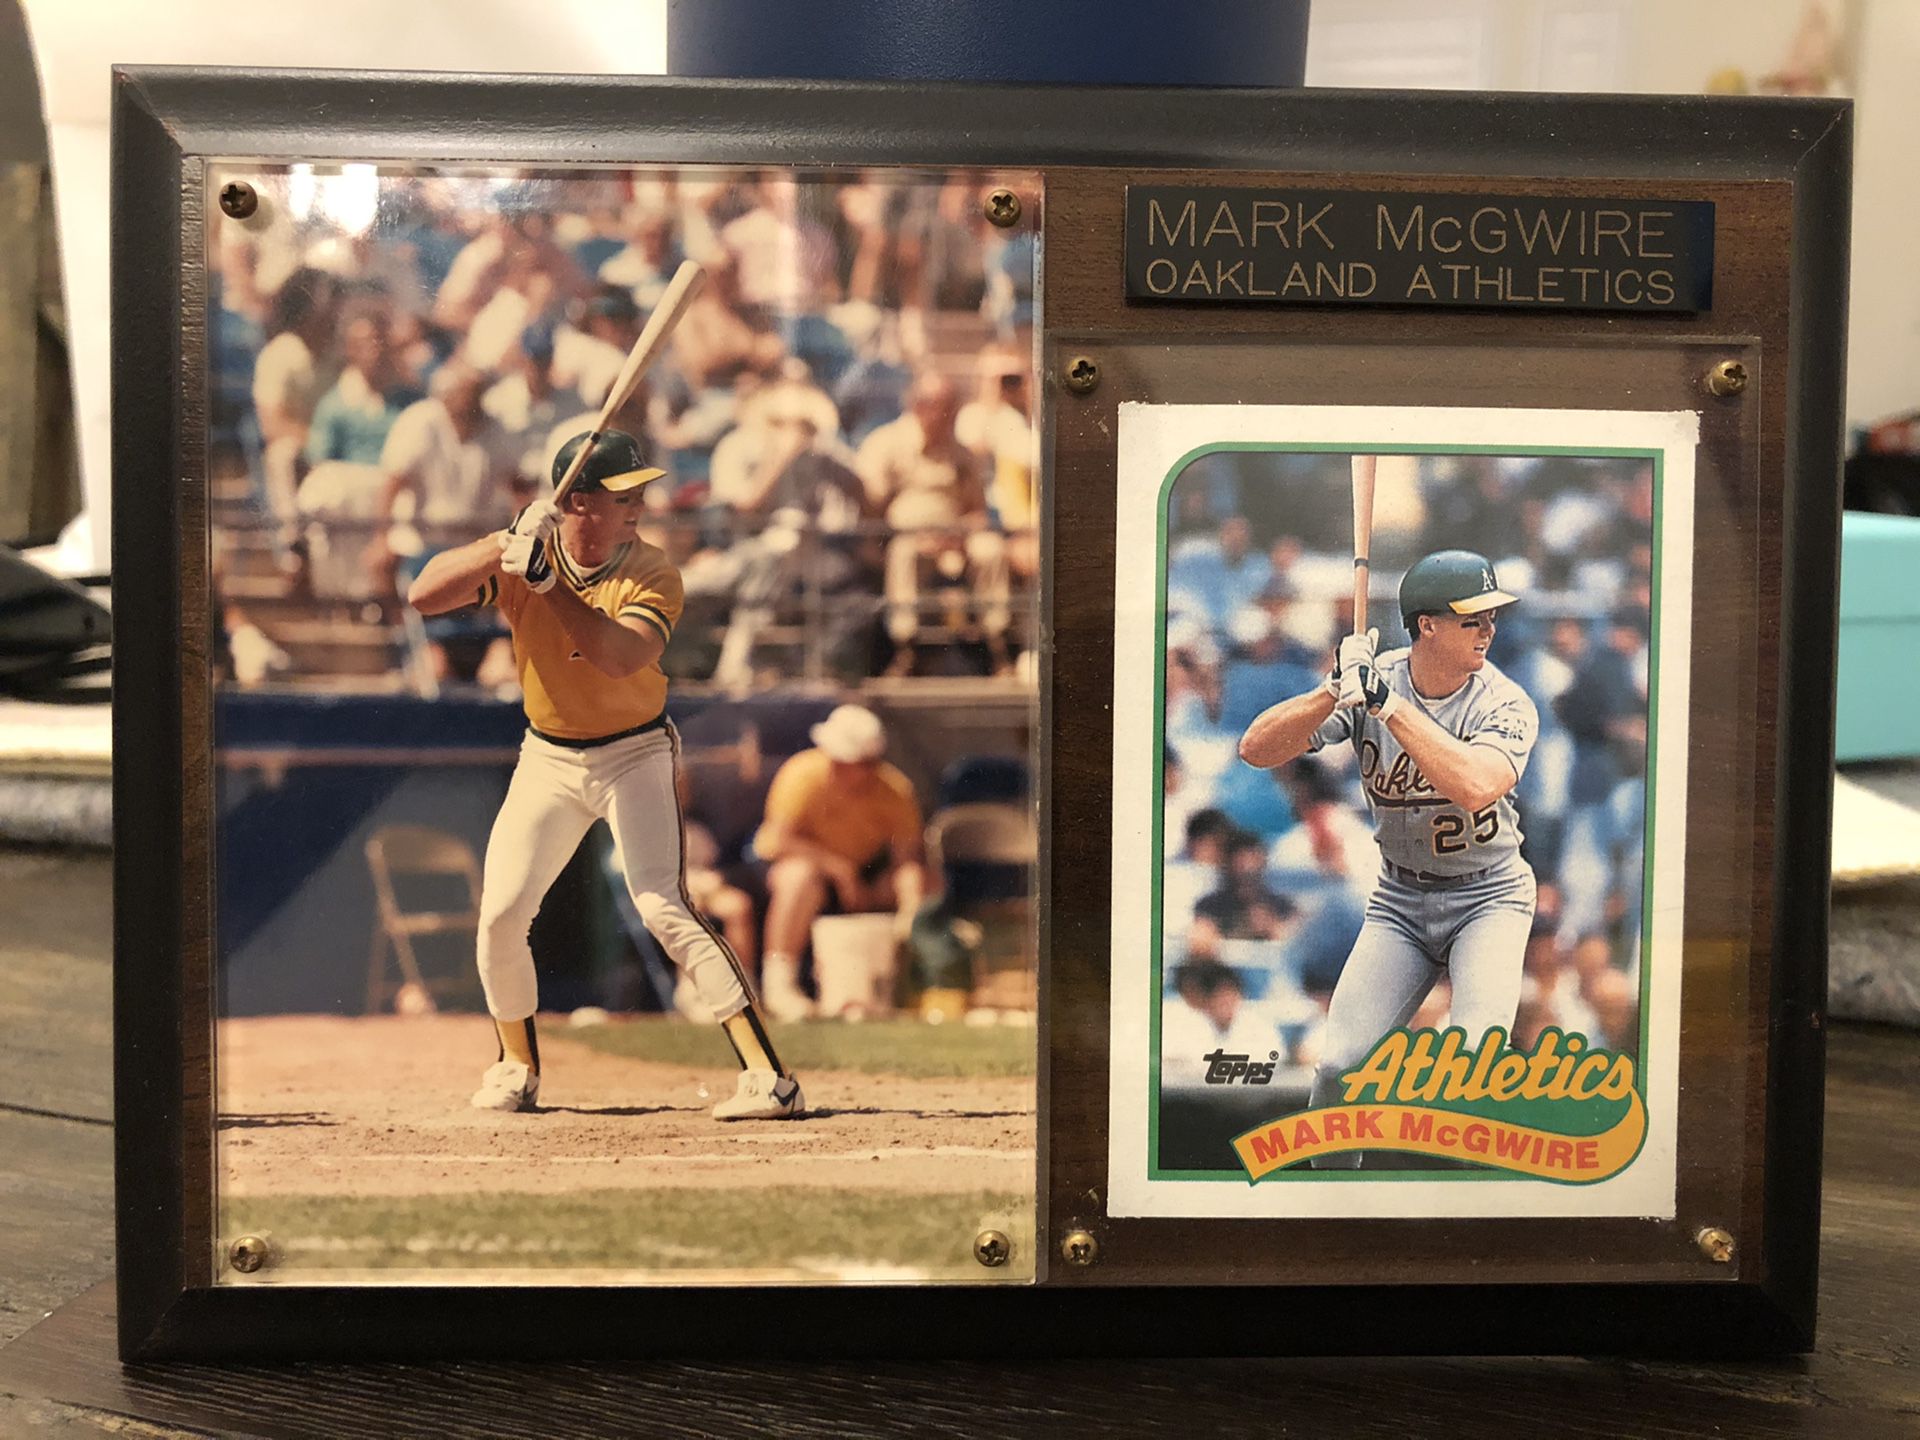 Mark McGwire Oakland A’s Plaque with Photo and Topps Baseball Card 8x6 inches